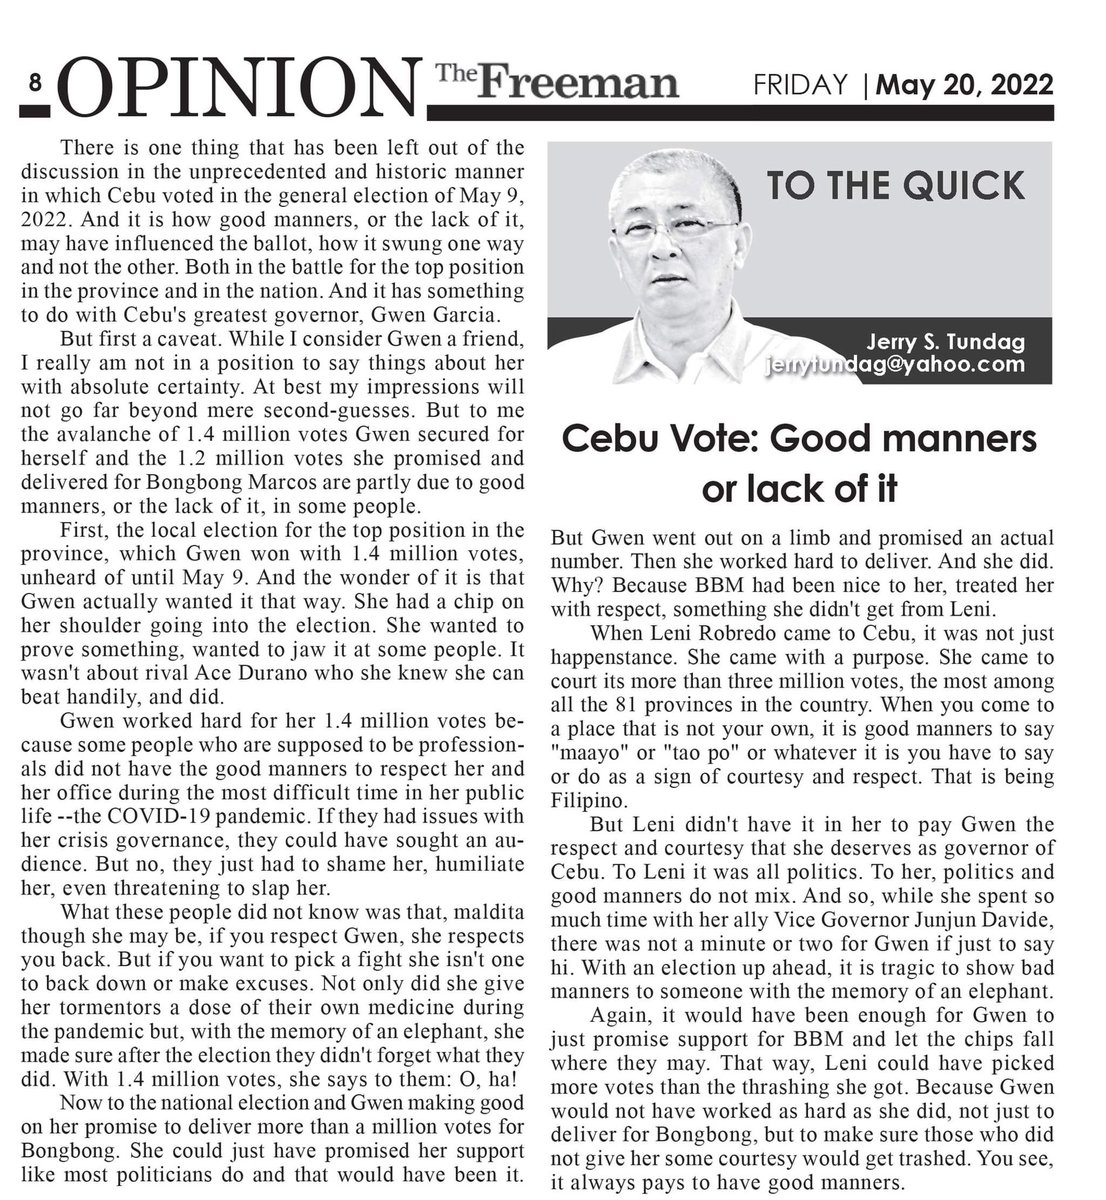 Gwen would not have worked as hard as she did, not just to deliver for #BBM, but to make sure those who did not give her some courtesy would get trashed. You see, it always pays to have good manners. @gwengarcia1ph #HalalanResults #Election2022PH #CEBU philstar.com/the-freeman/op…